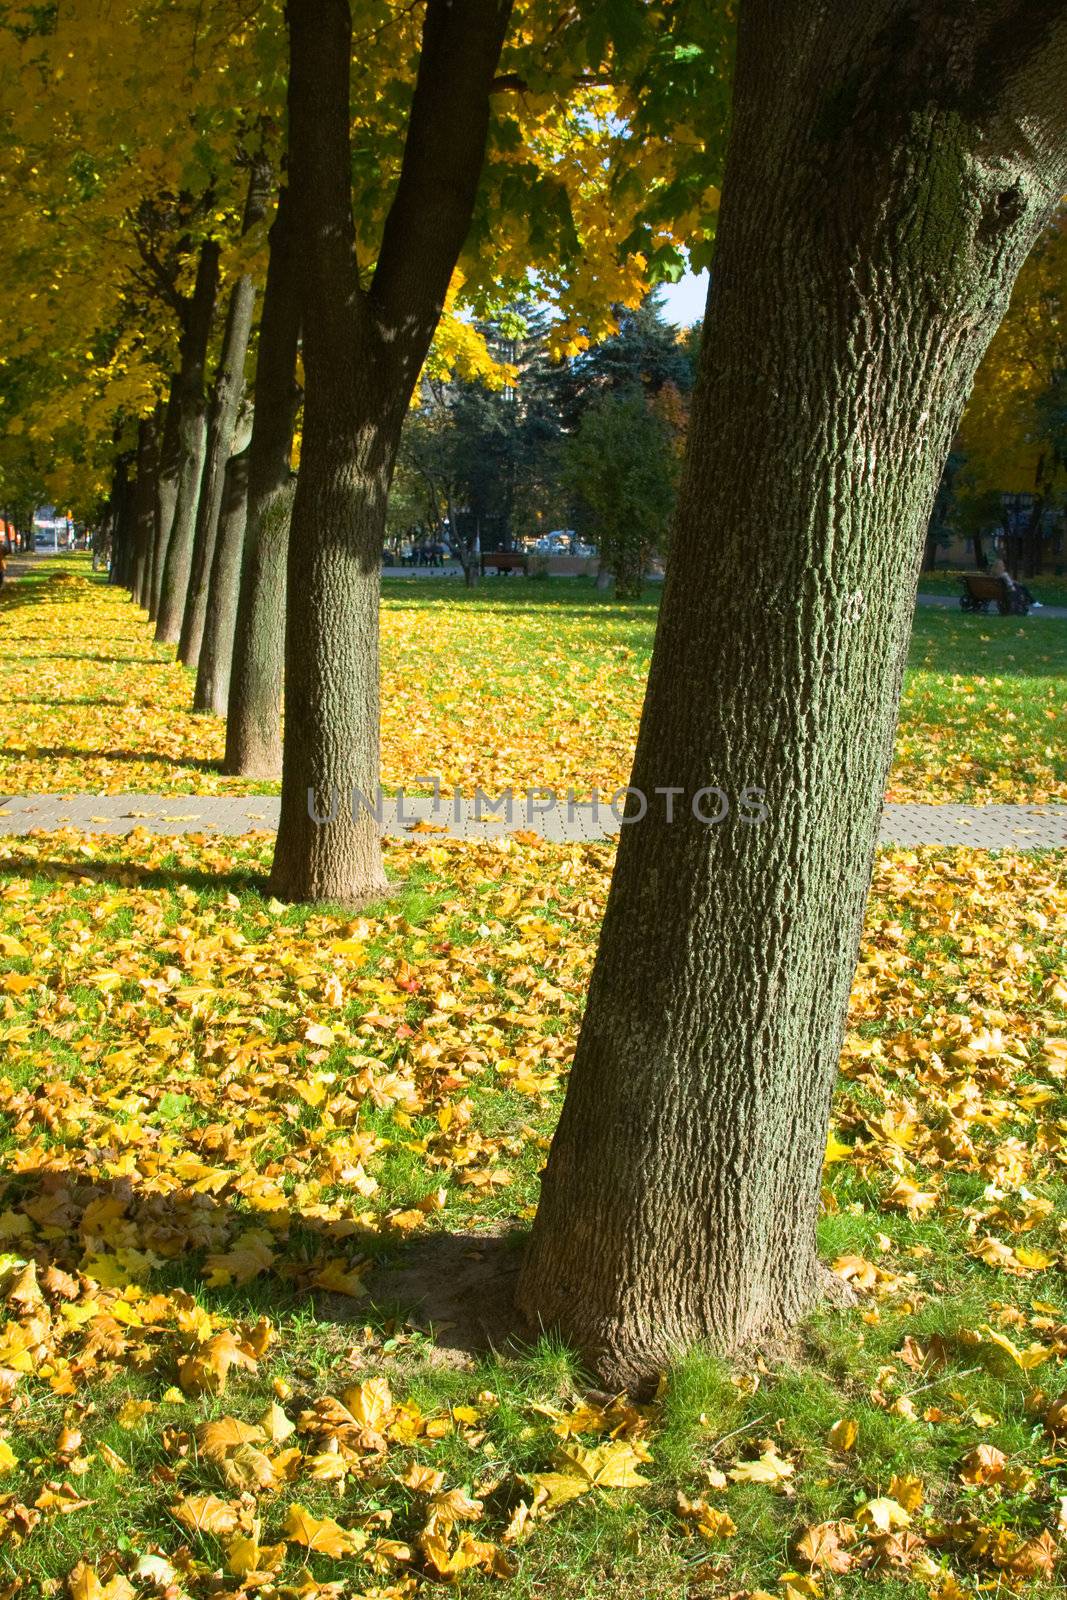 The avenue among trees is covered by leaves